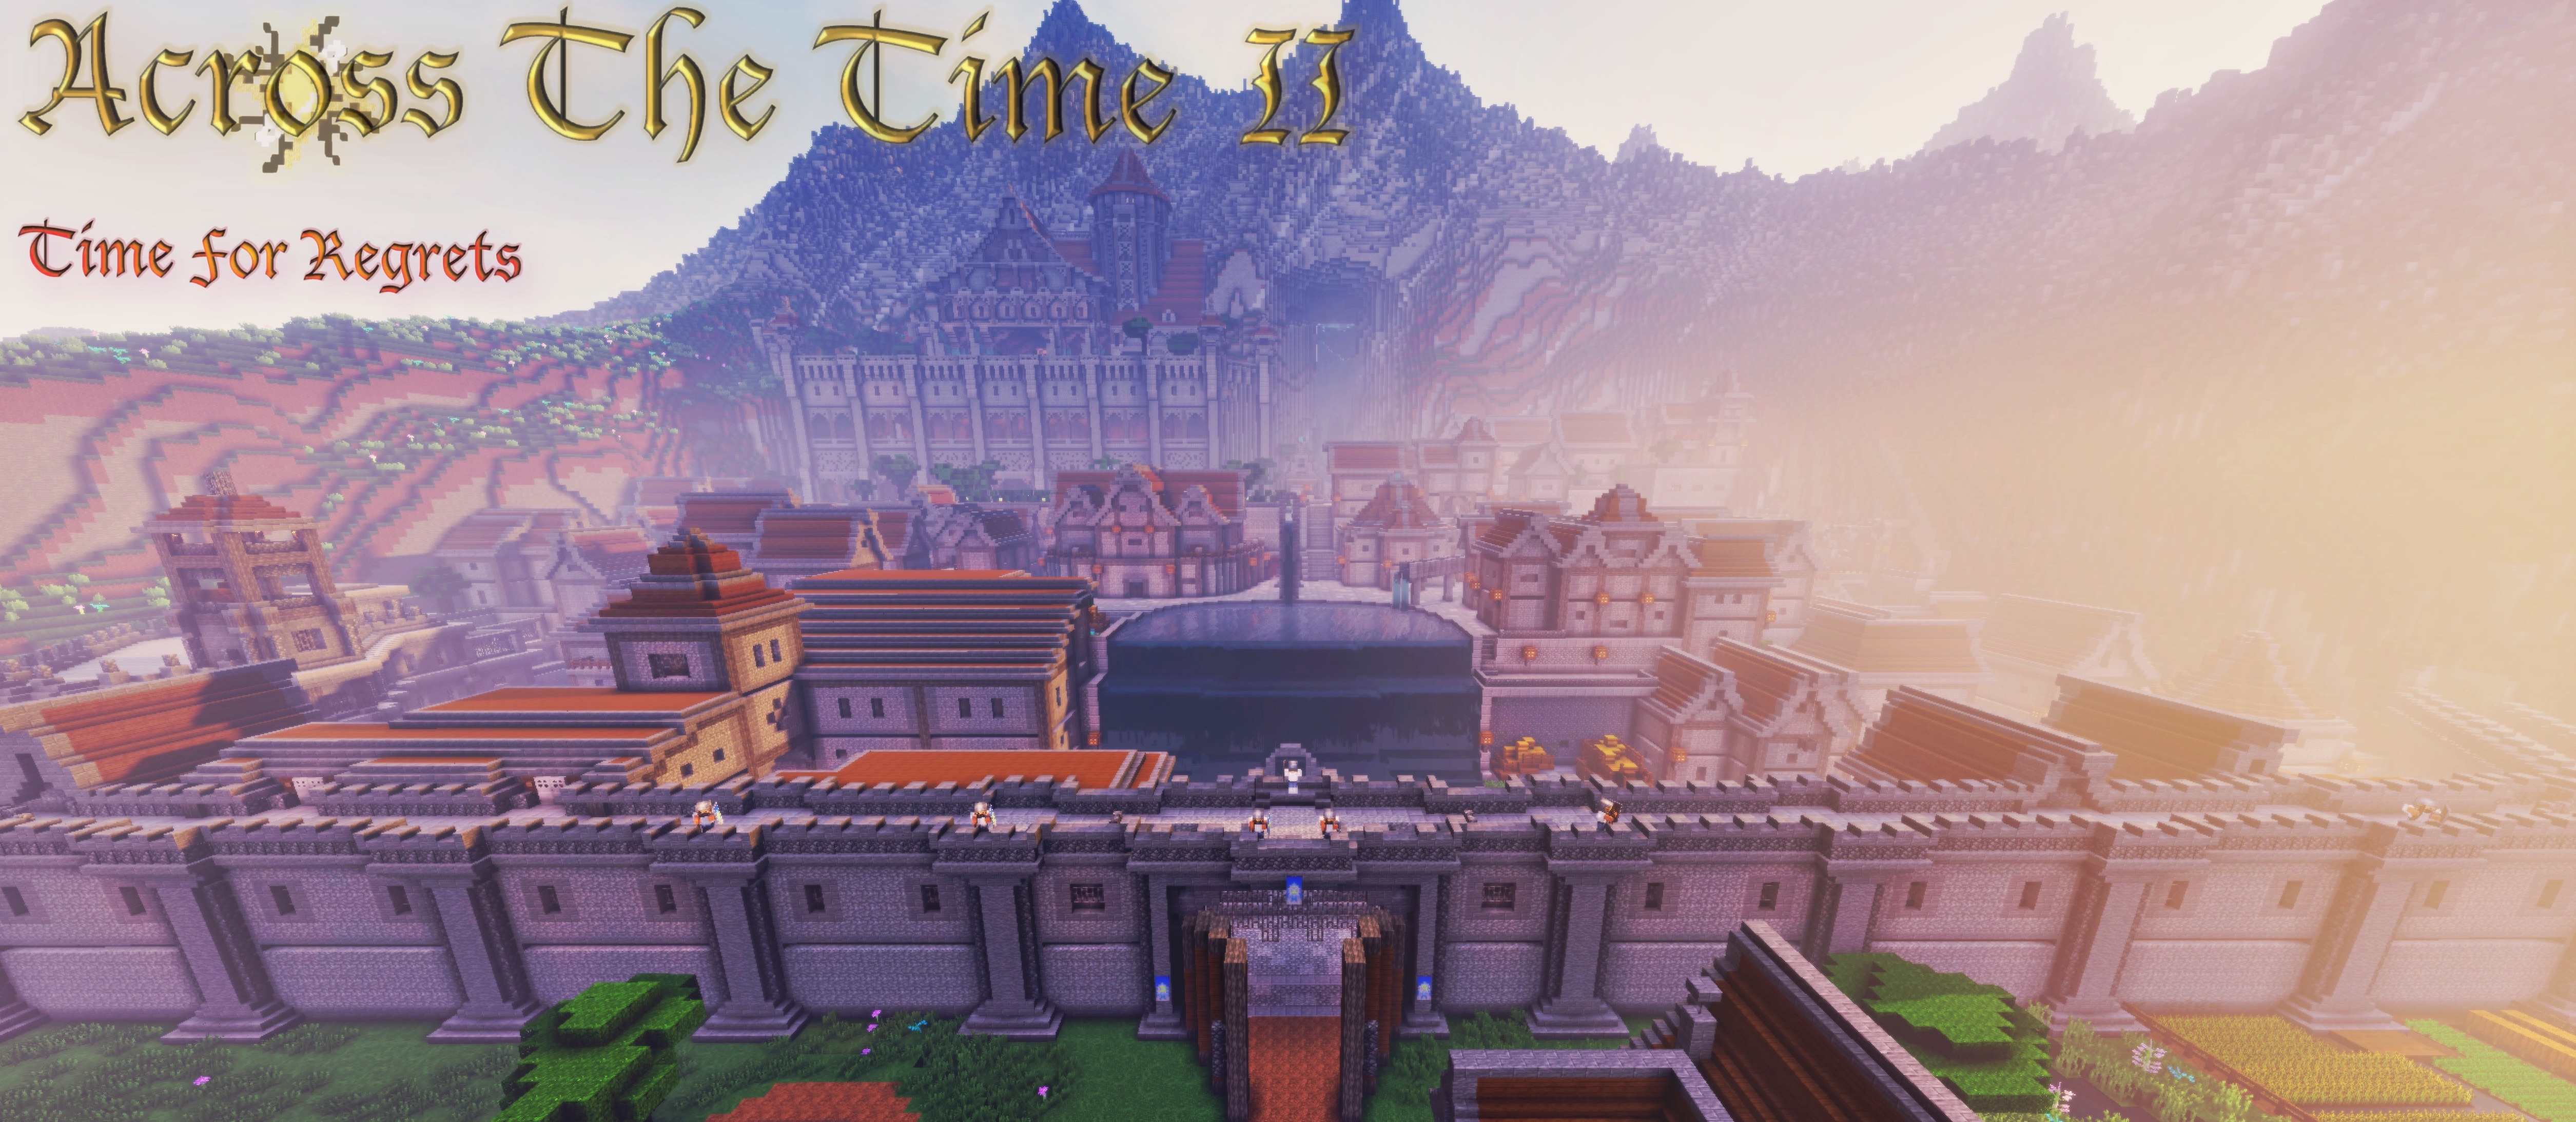 Across The Time II - Time For Regrets [Epic adventure RPG map] {1.18.2} Minecraft Map